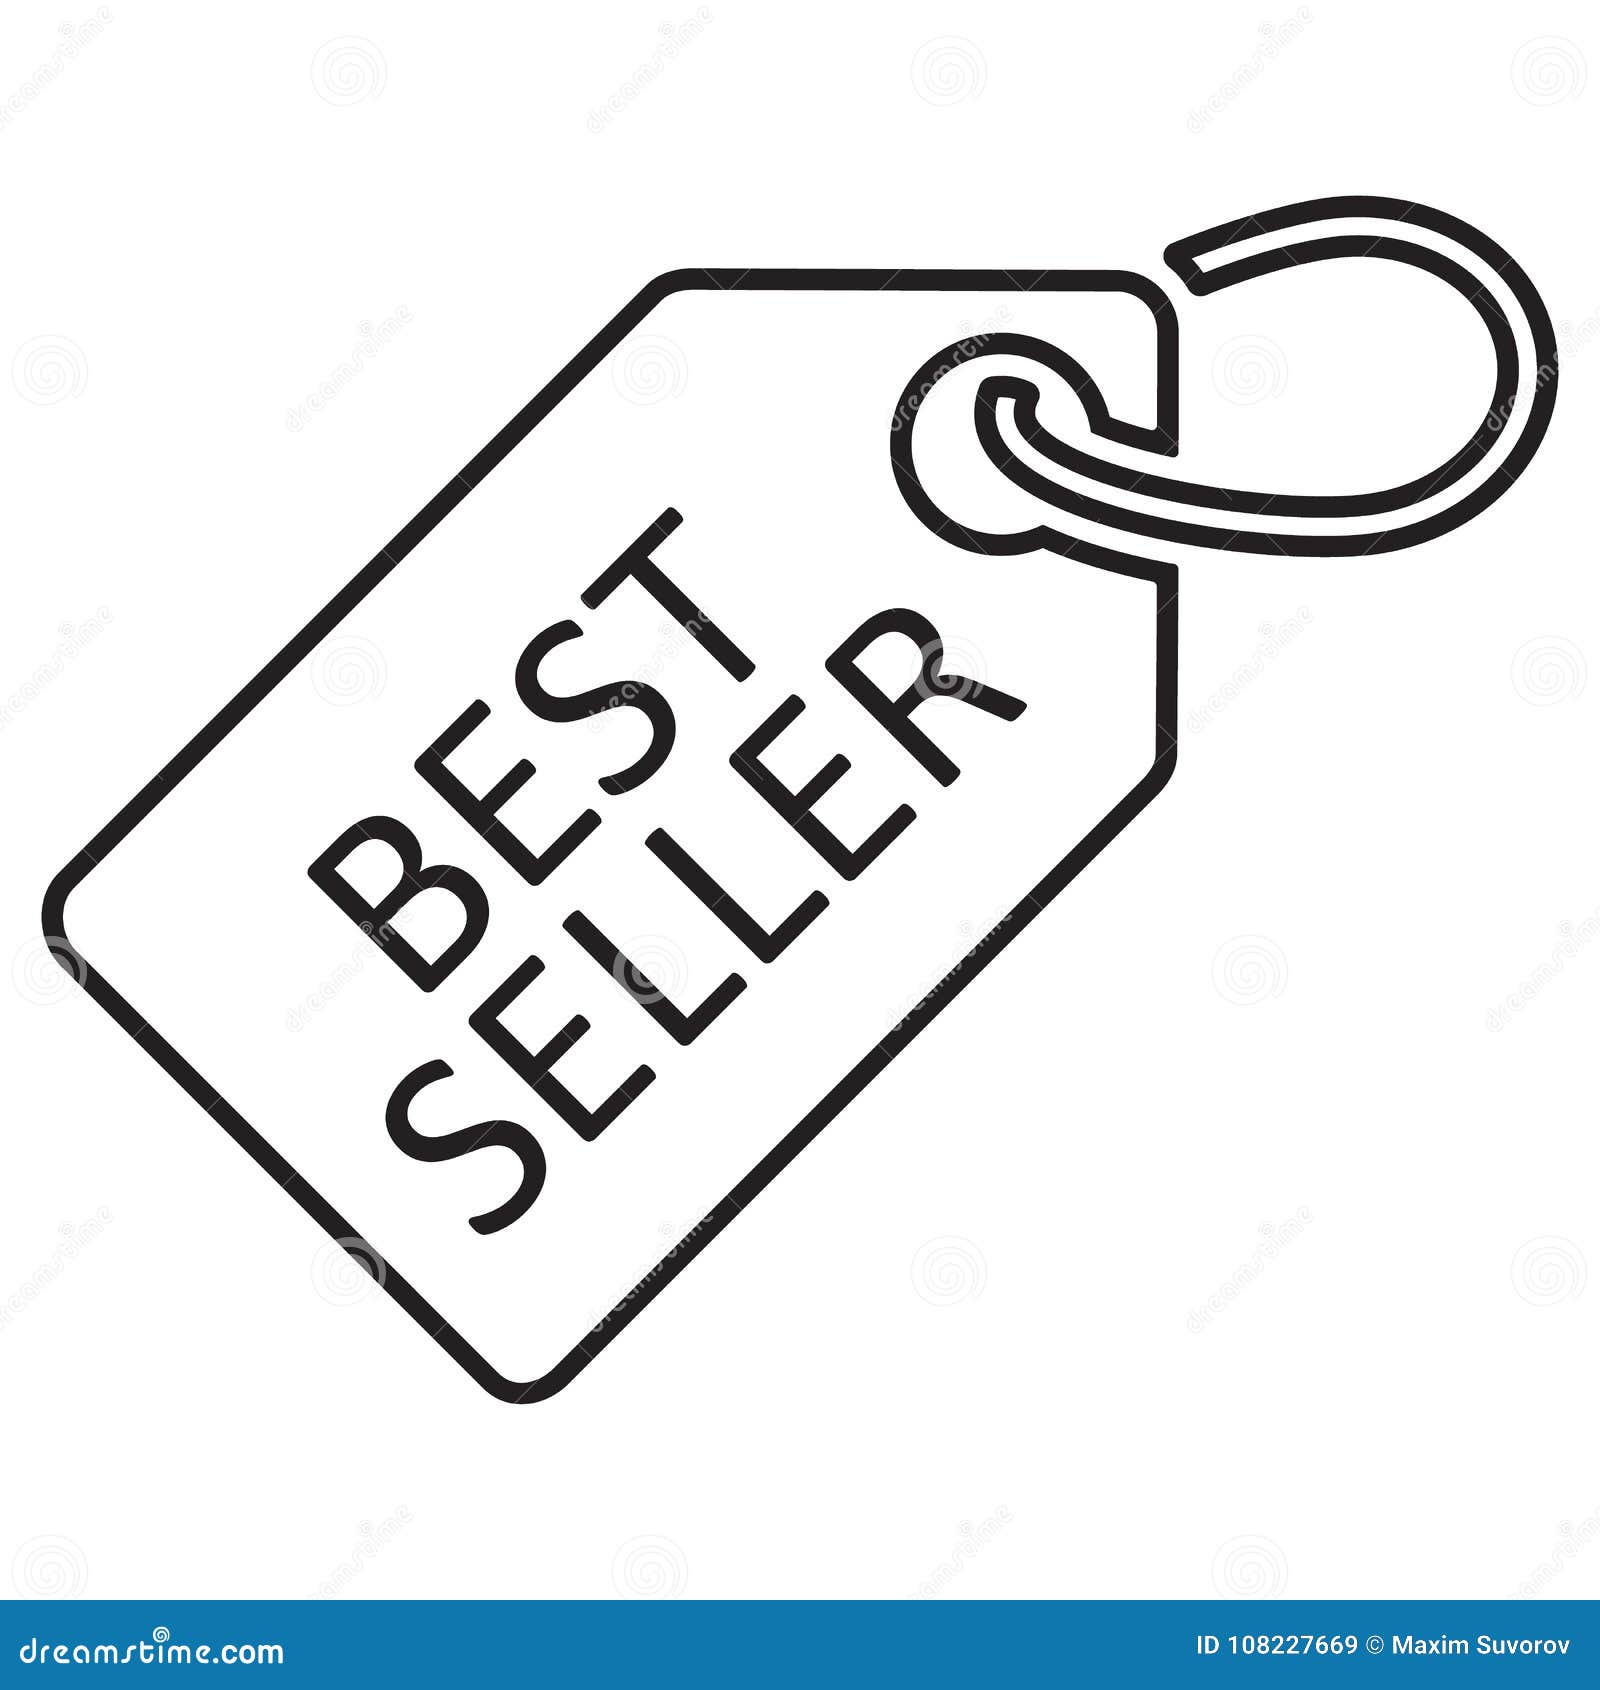 https://thumbs.dreamstime.com/z/best-seller-tag-line-icon-black-color-isolated-white-best-seller-tag-line-icon-black-color-isolated-white-vector-108227669.jpg